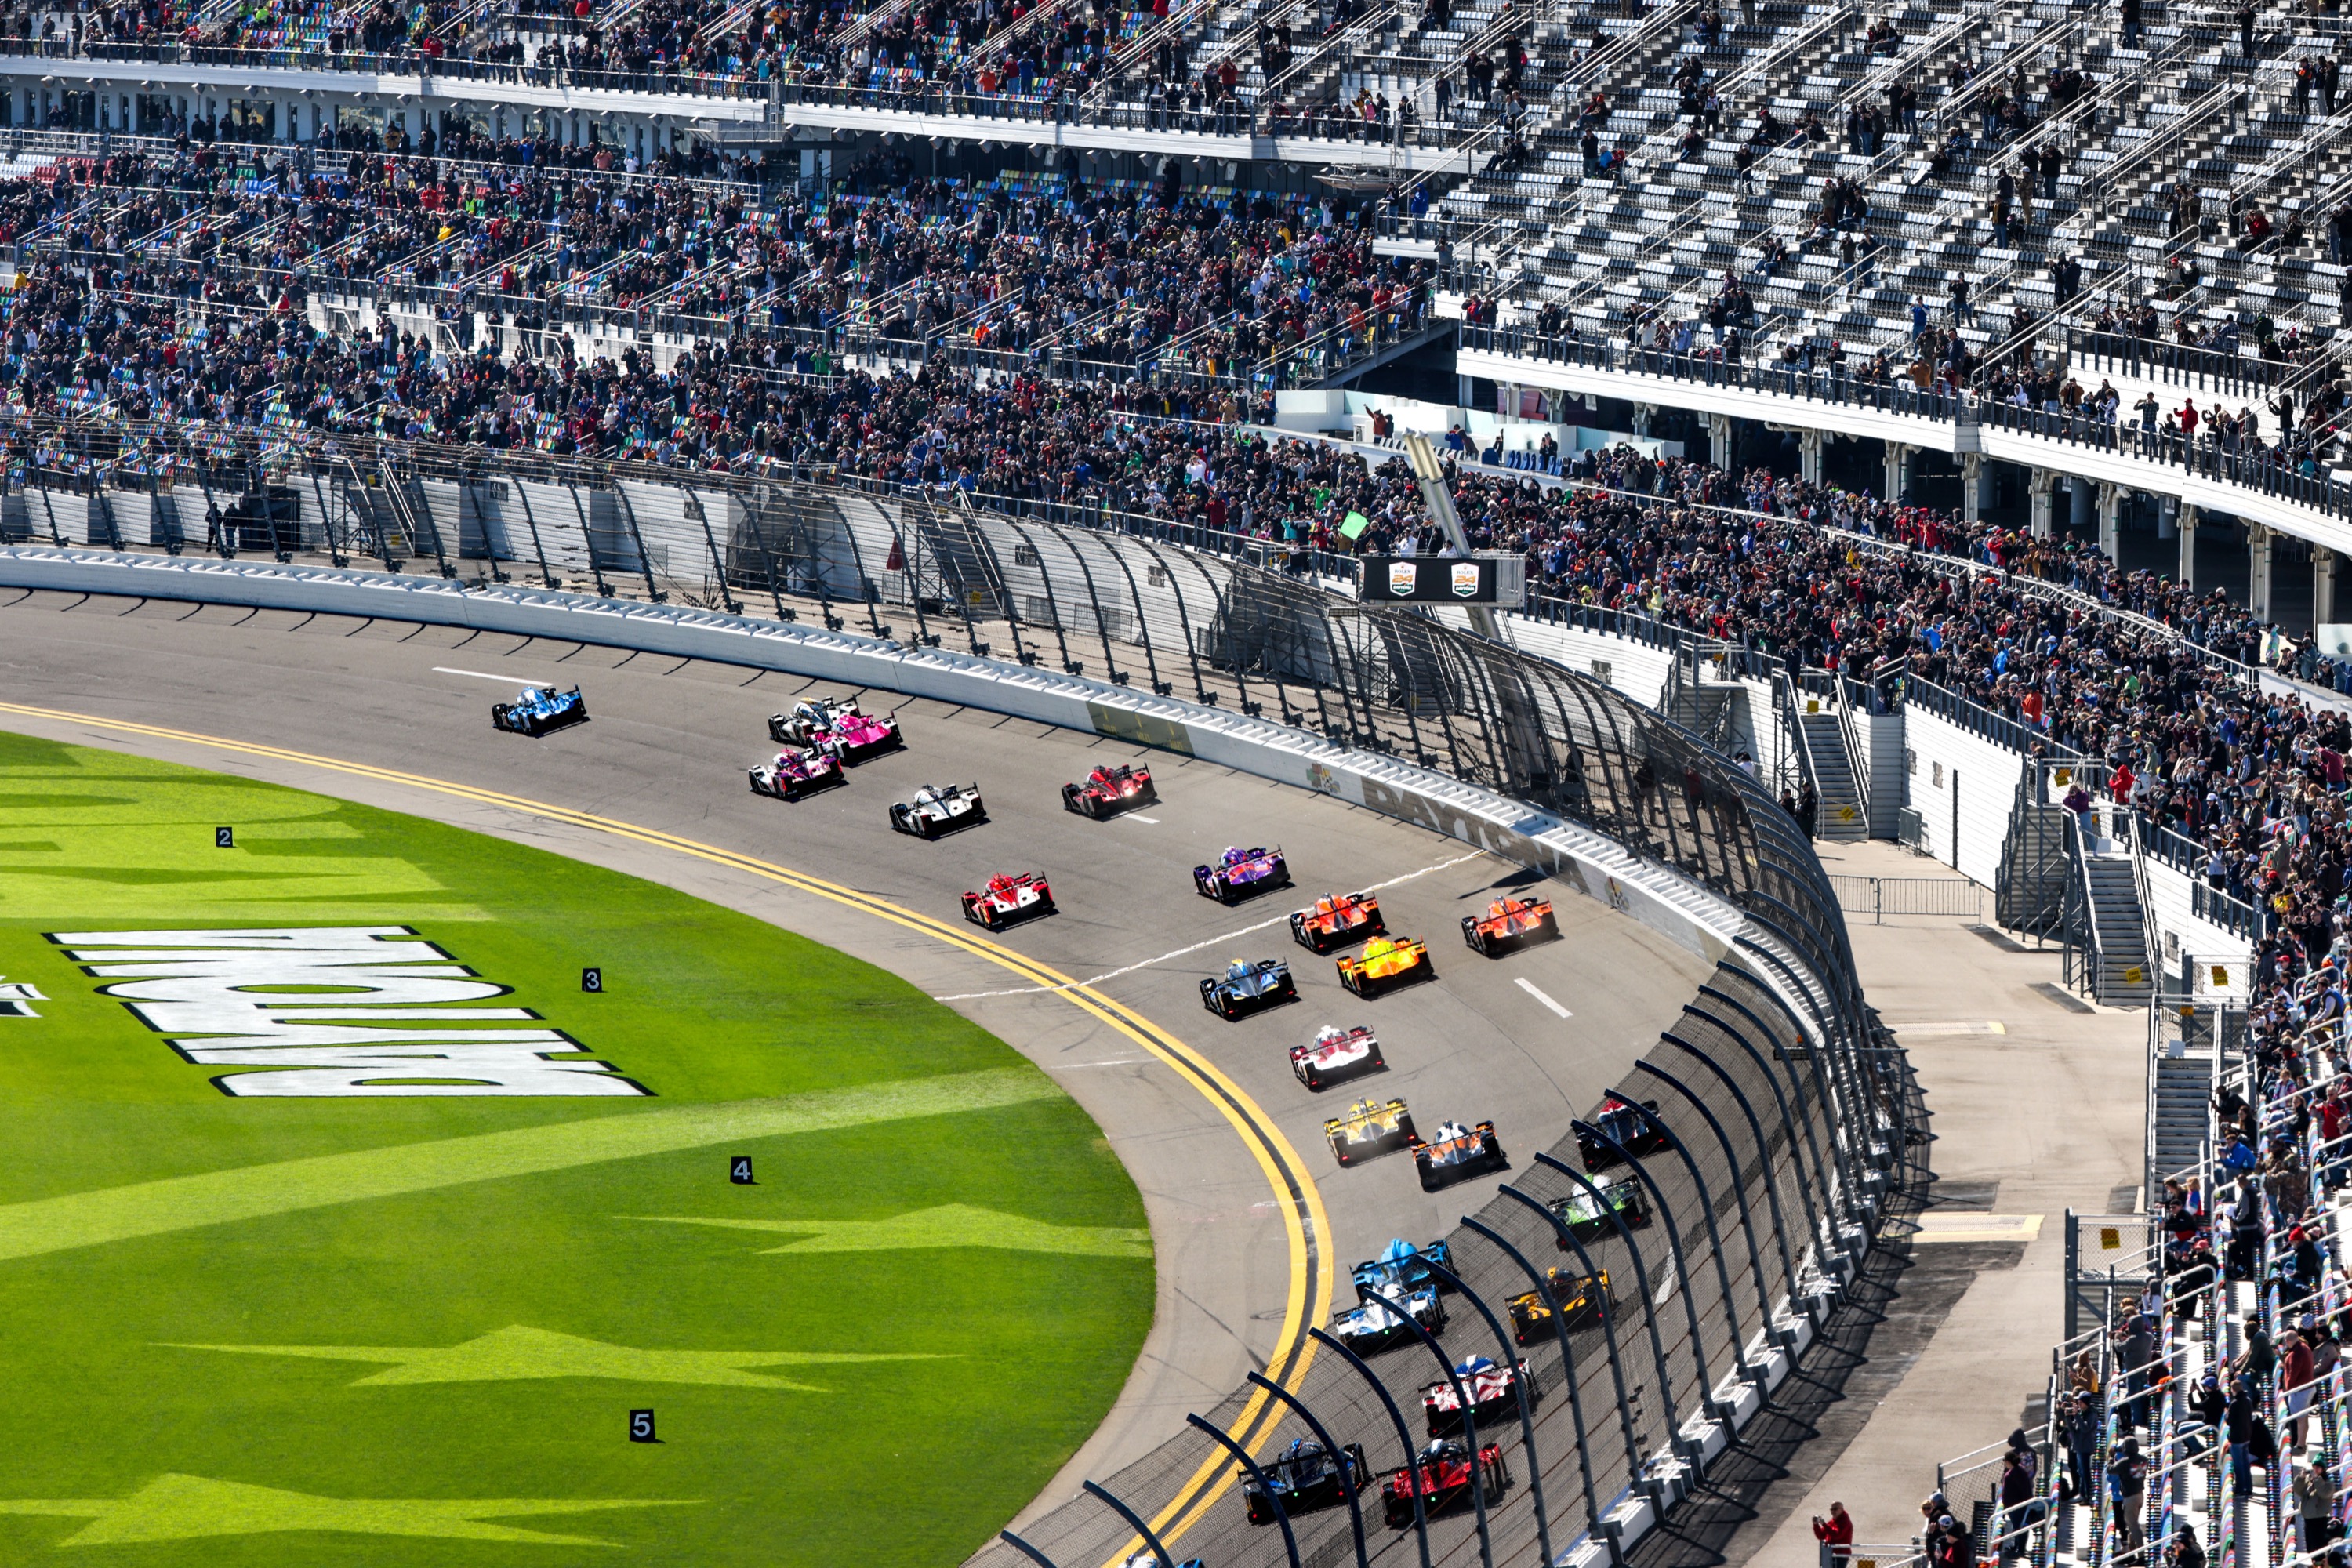 Acura wins overall, and GTD Pro delivers at the Rolex 24 Daytona | Ars Technica